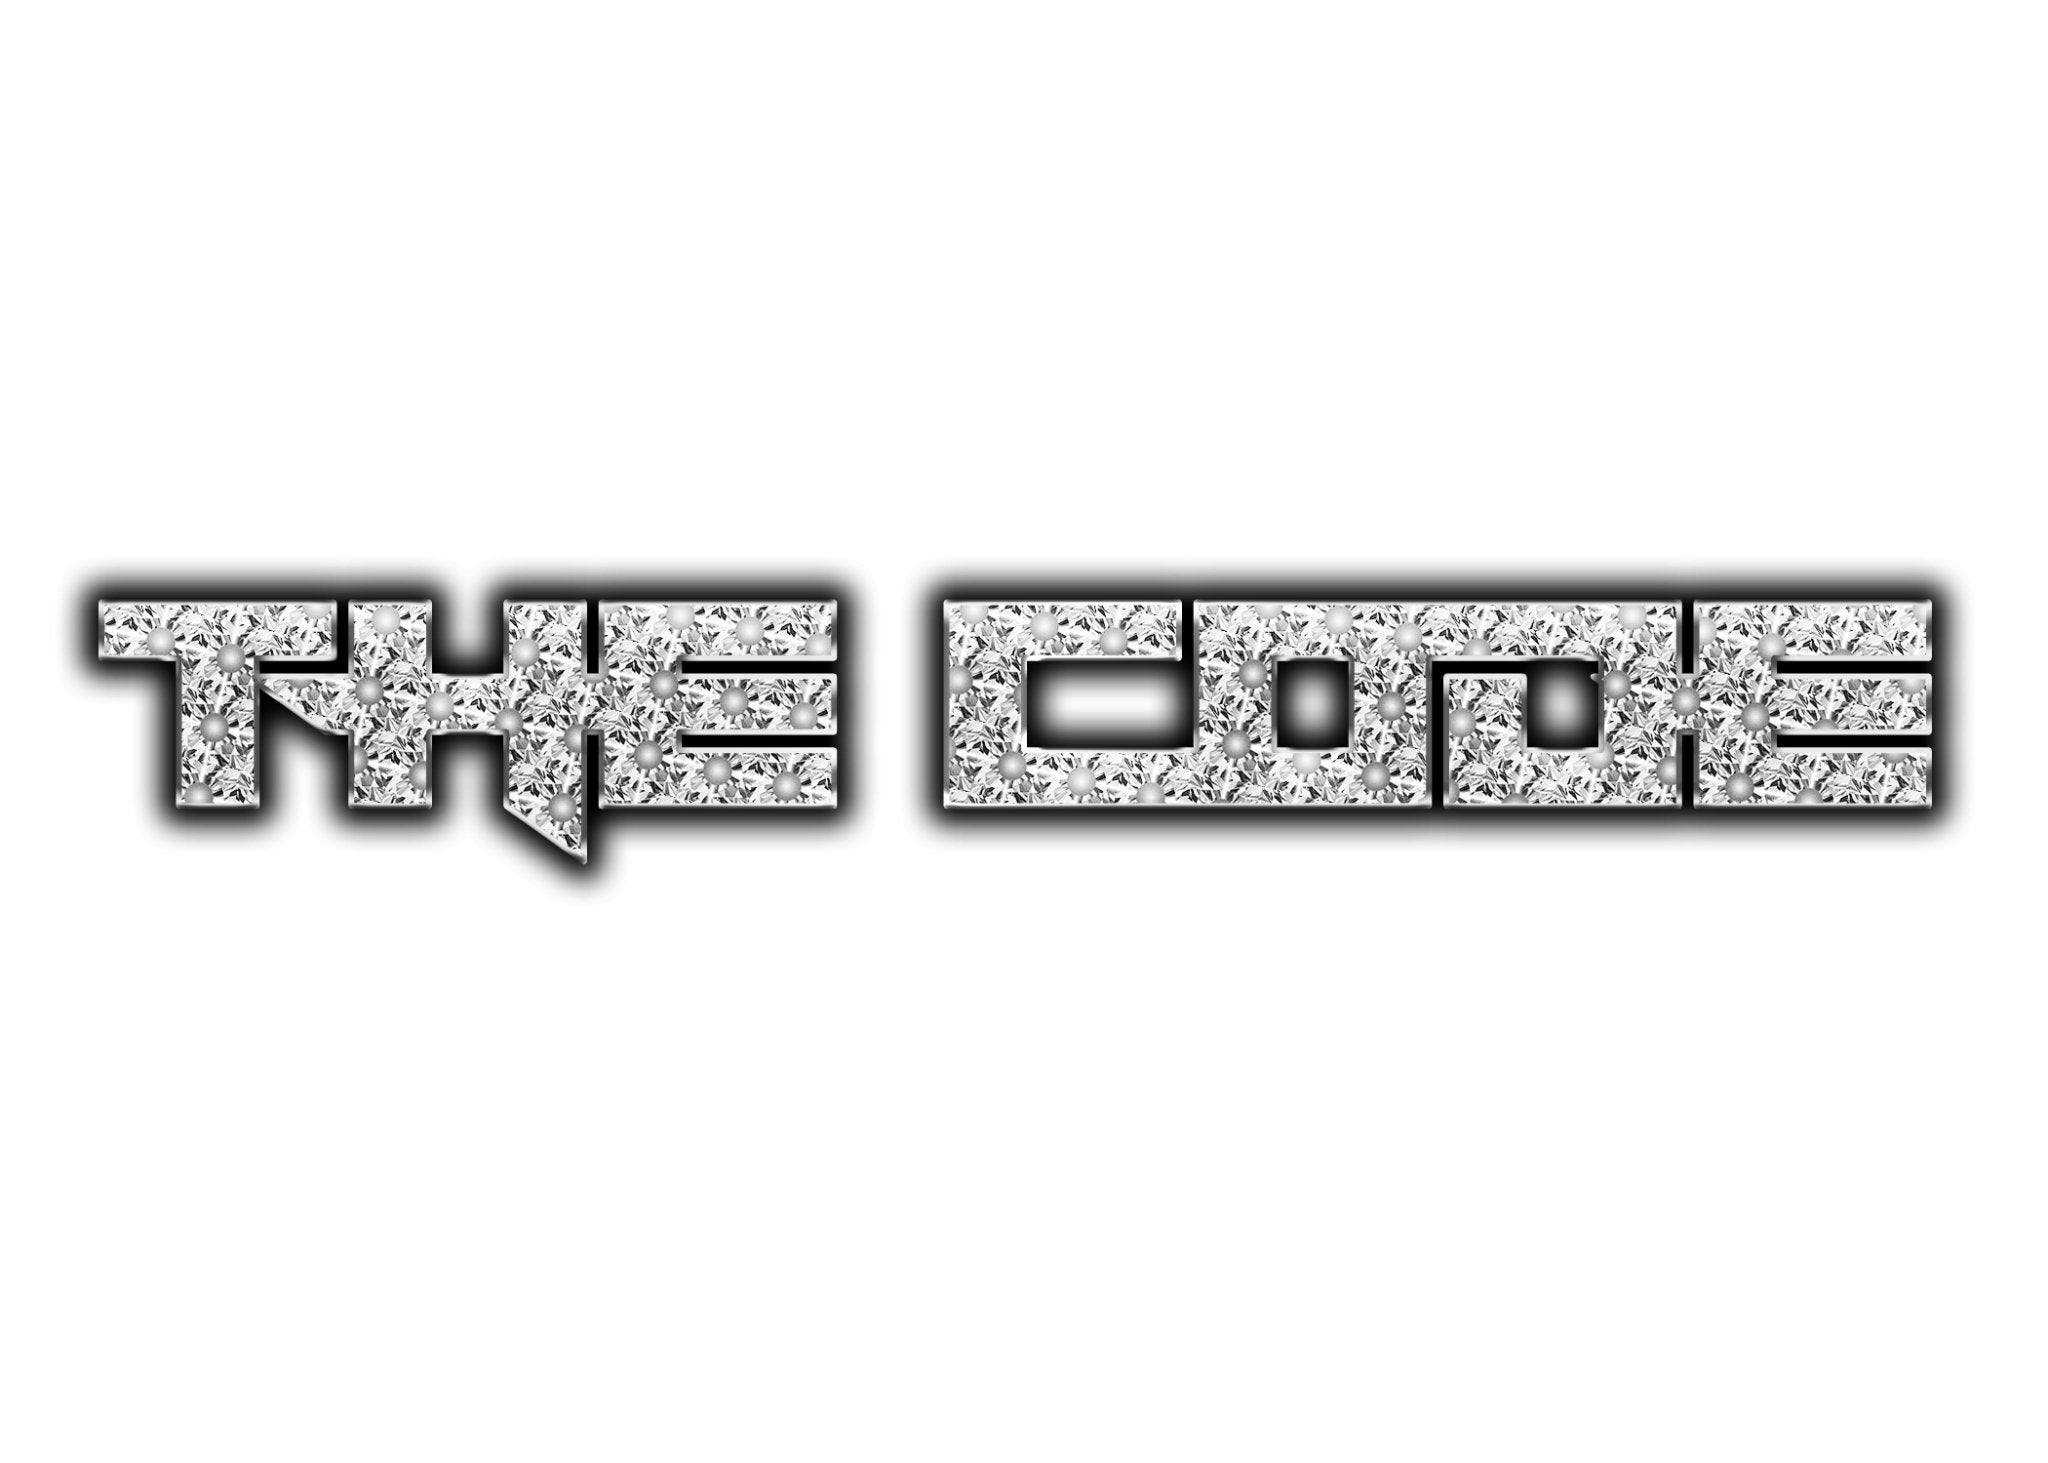 THE CODE - The Code Clothing